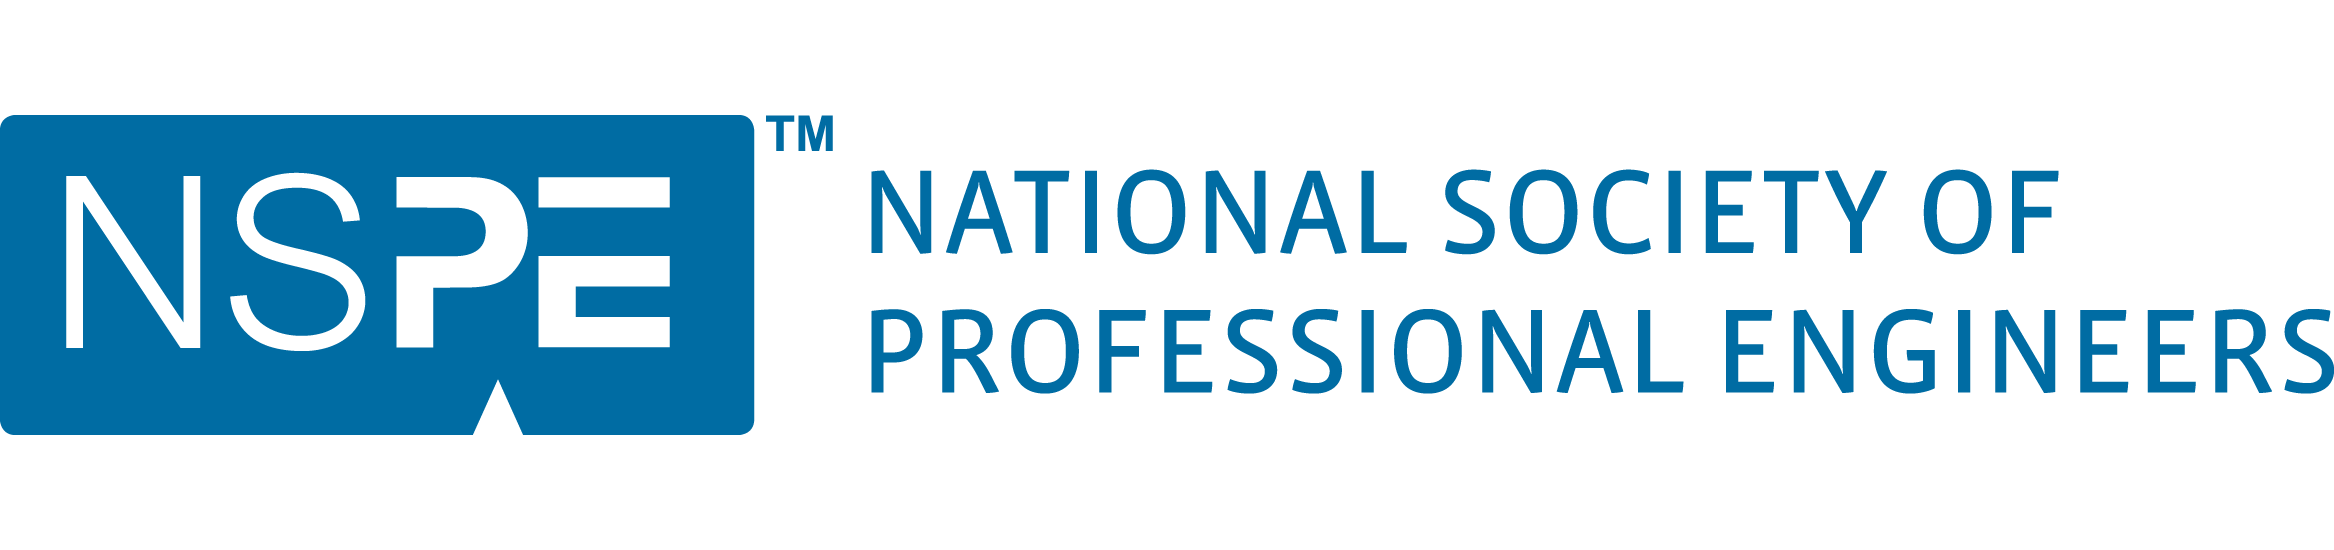 National Society of Profession Engineers Logo